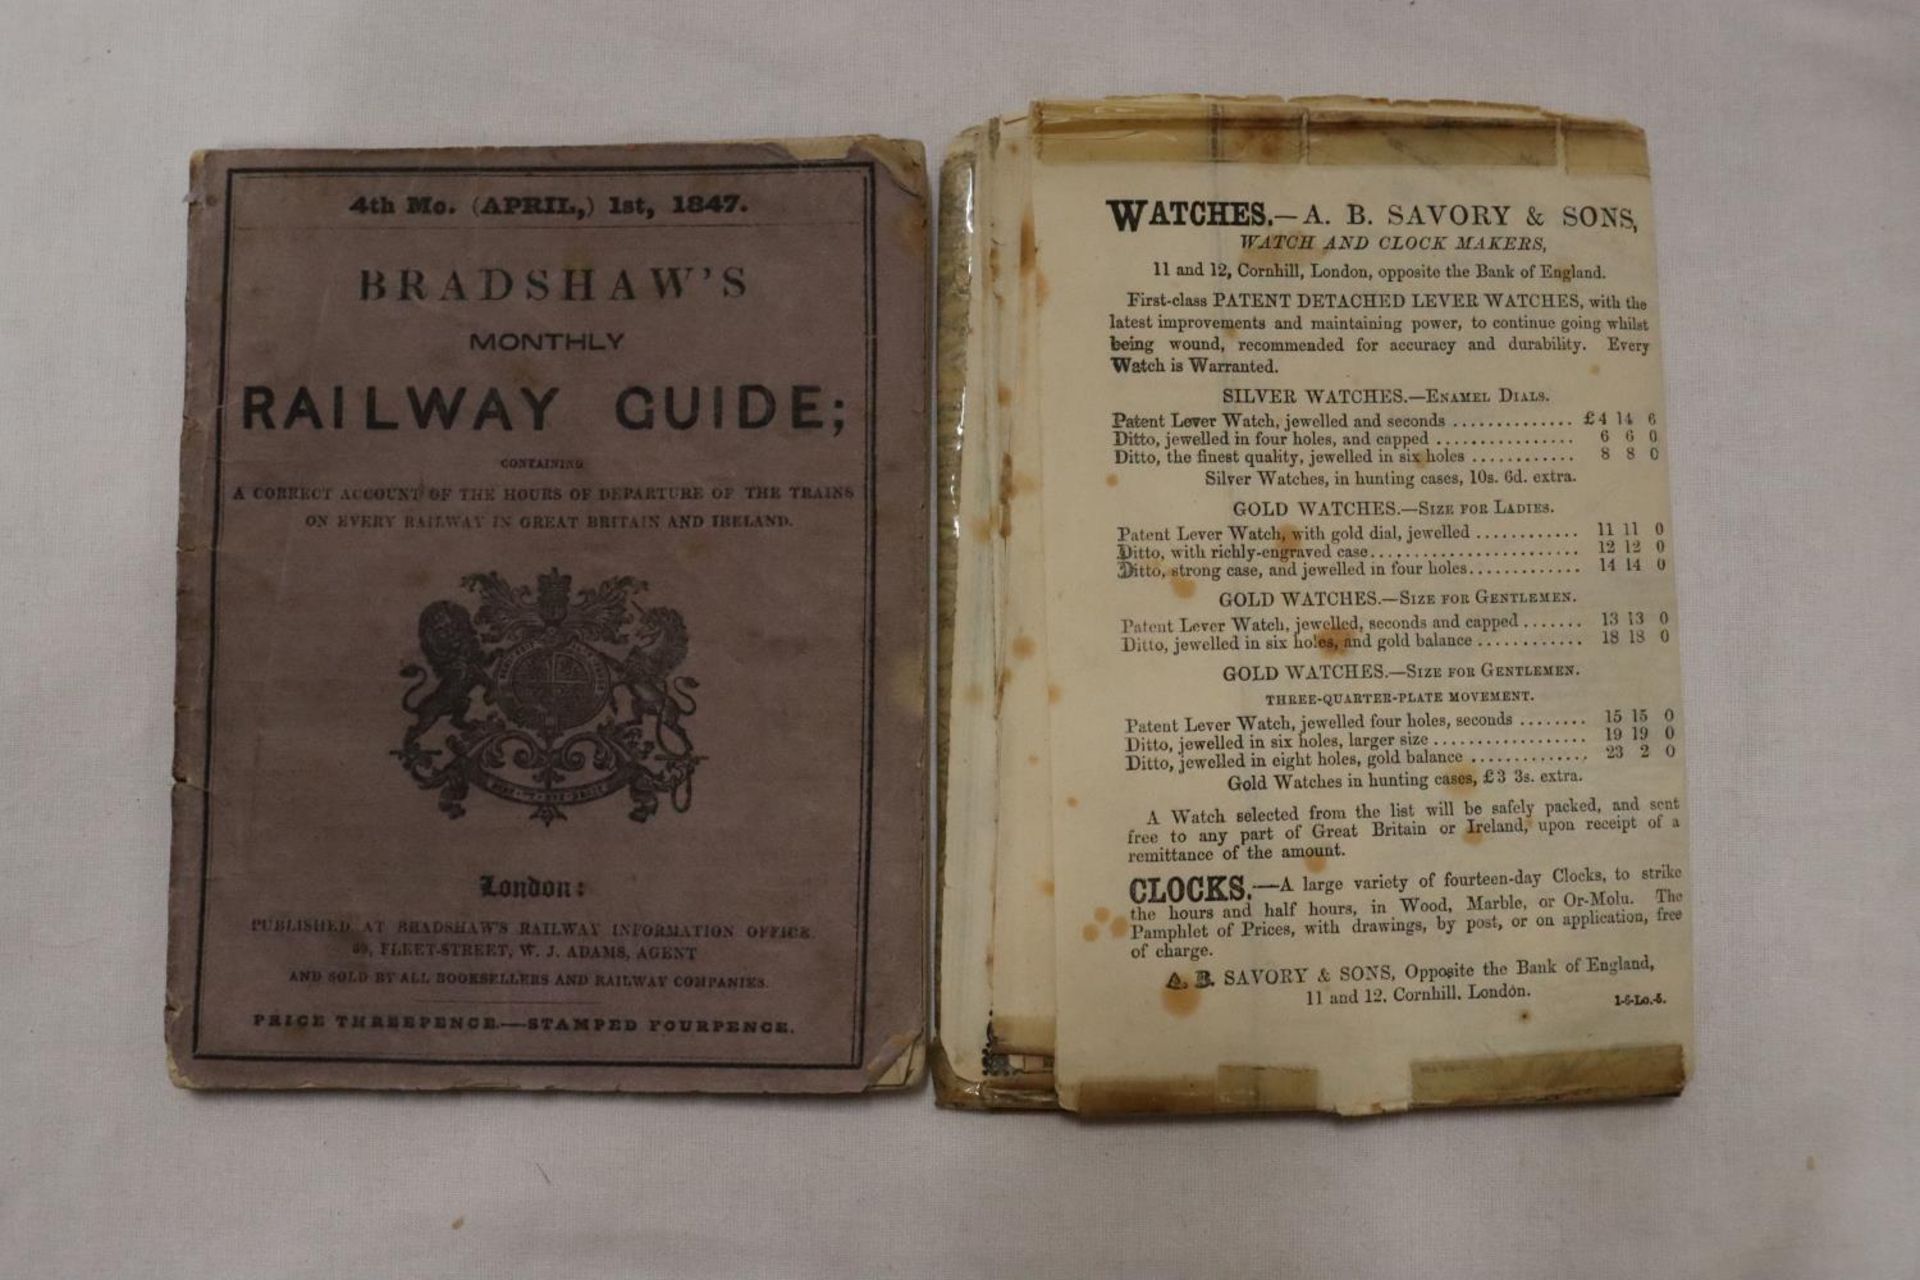 A BRADSHAWS MONTHLY RAILWAY GUIDE DATED APRIL 1847, PAPERBACK VERSION AND A FOLD OUT RAILWAY MAP